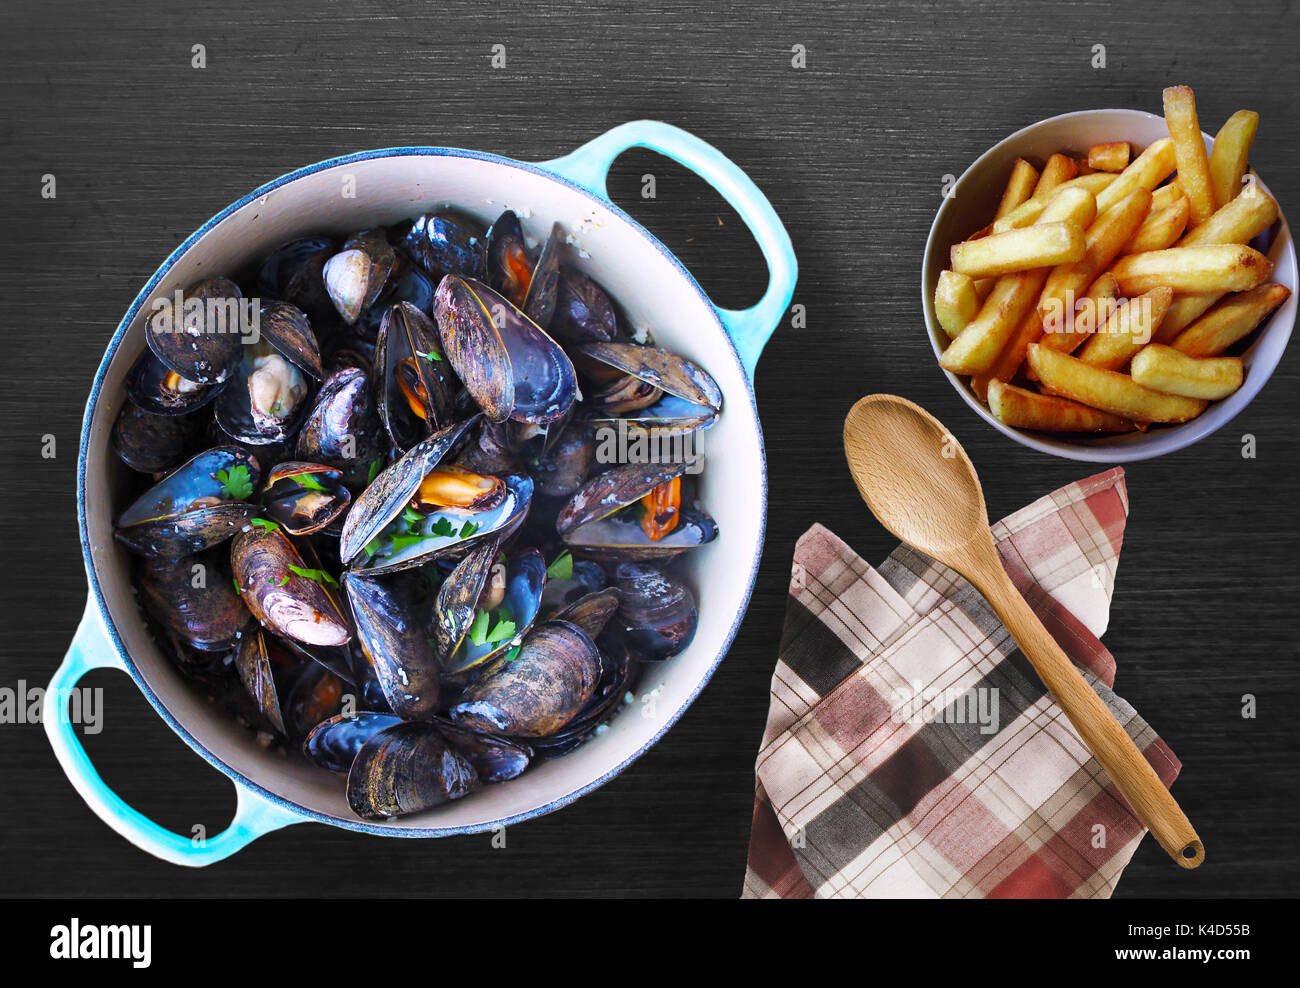 Moules frites Stock Photo